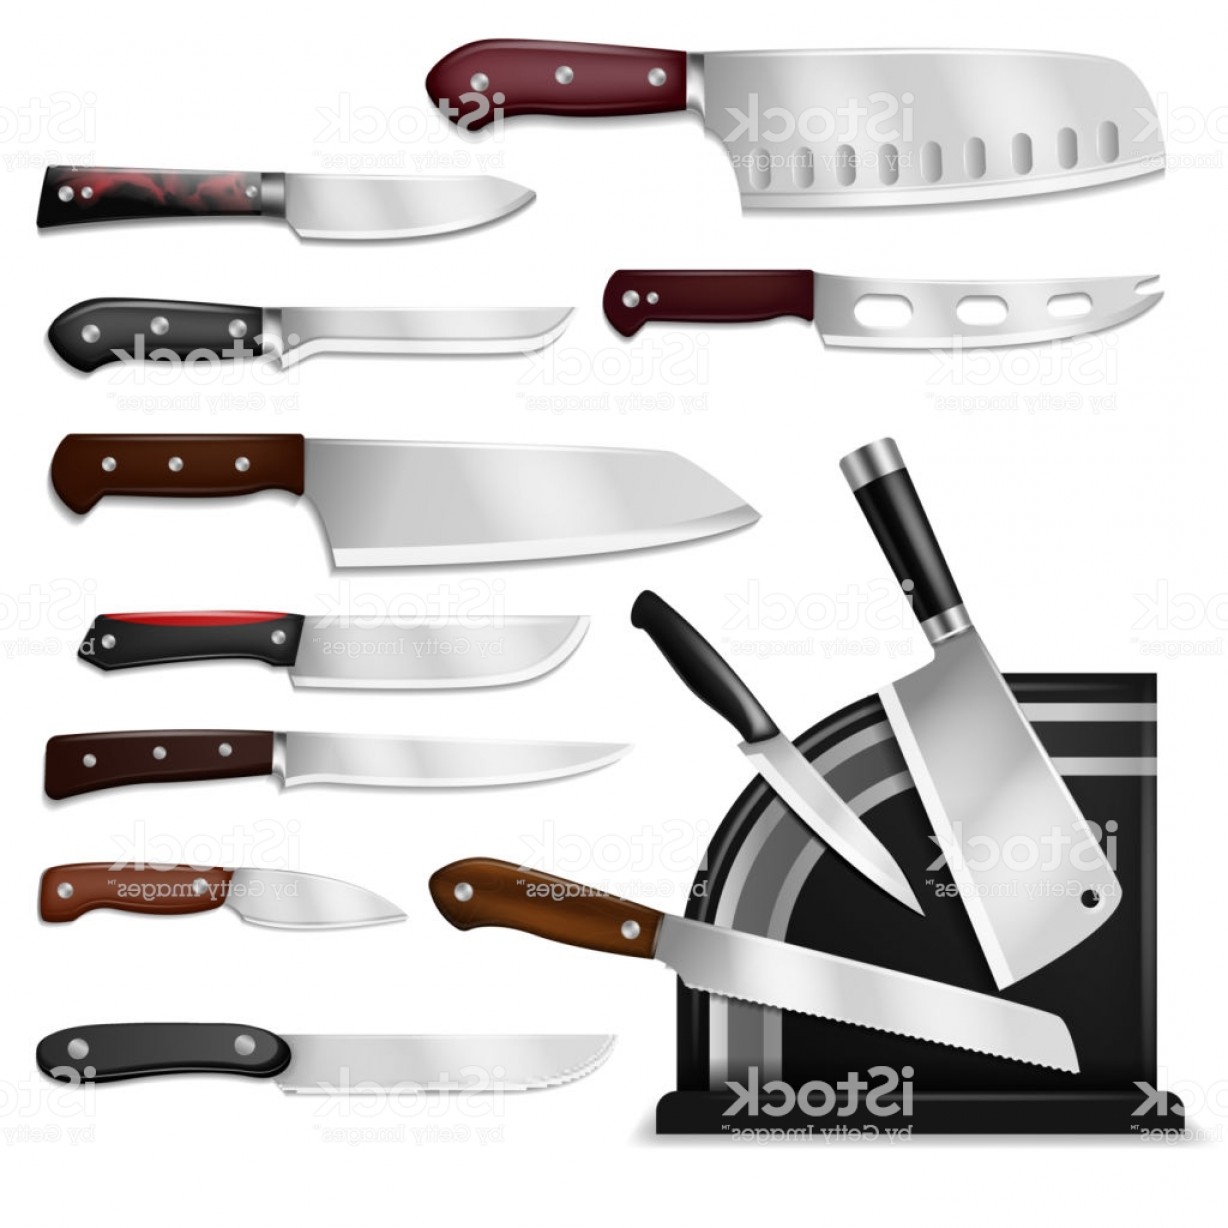 Download Chef Knife Vector at Vectorified.com | Collection of Chef ...